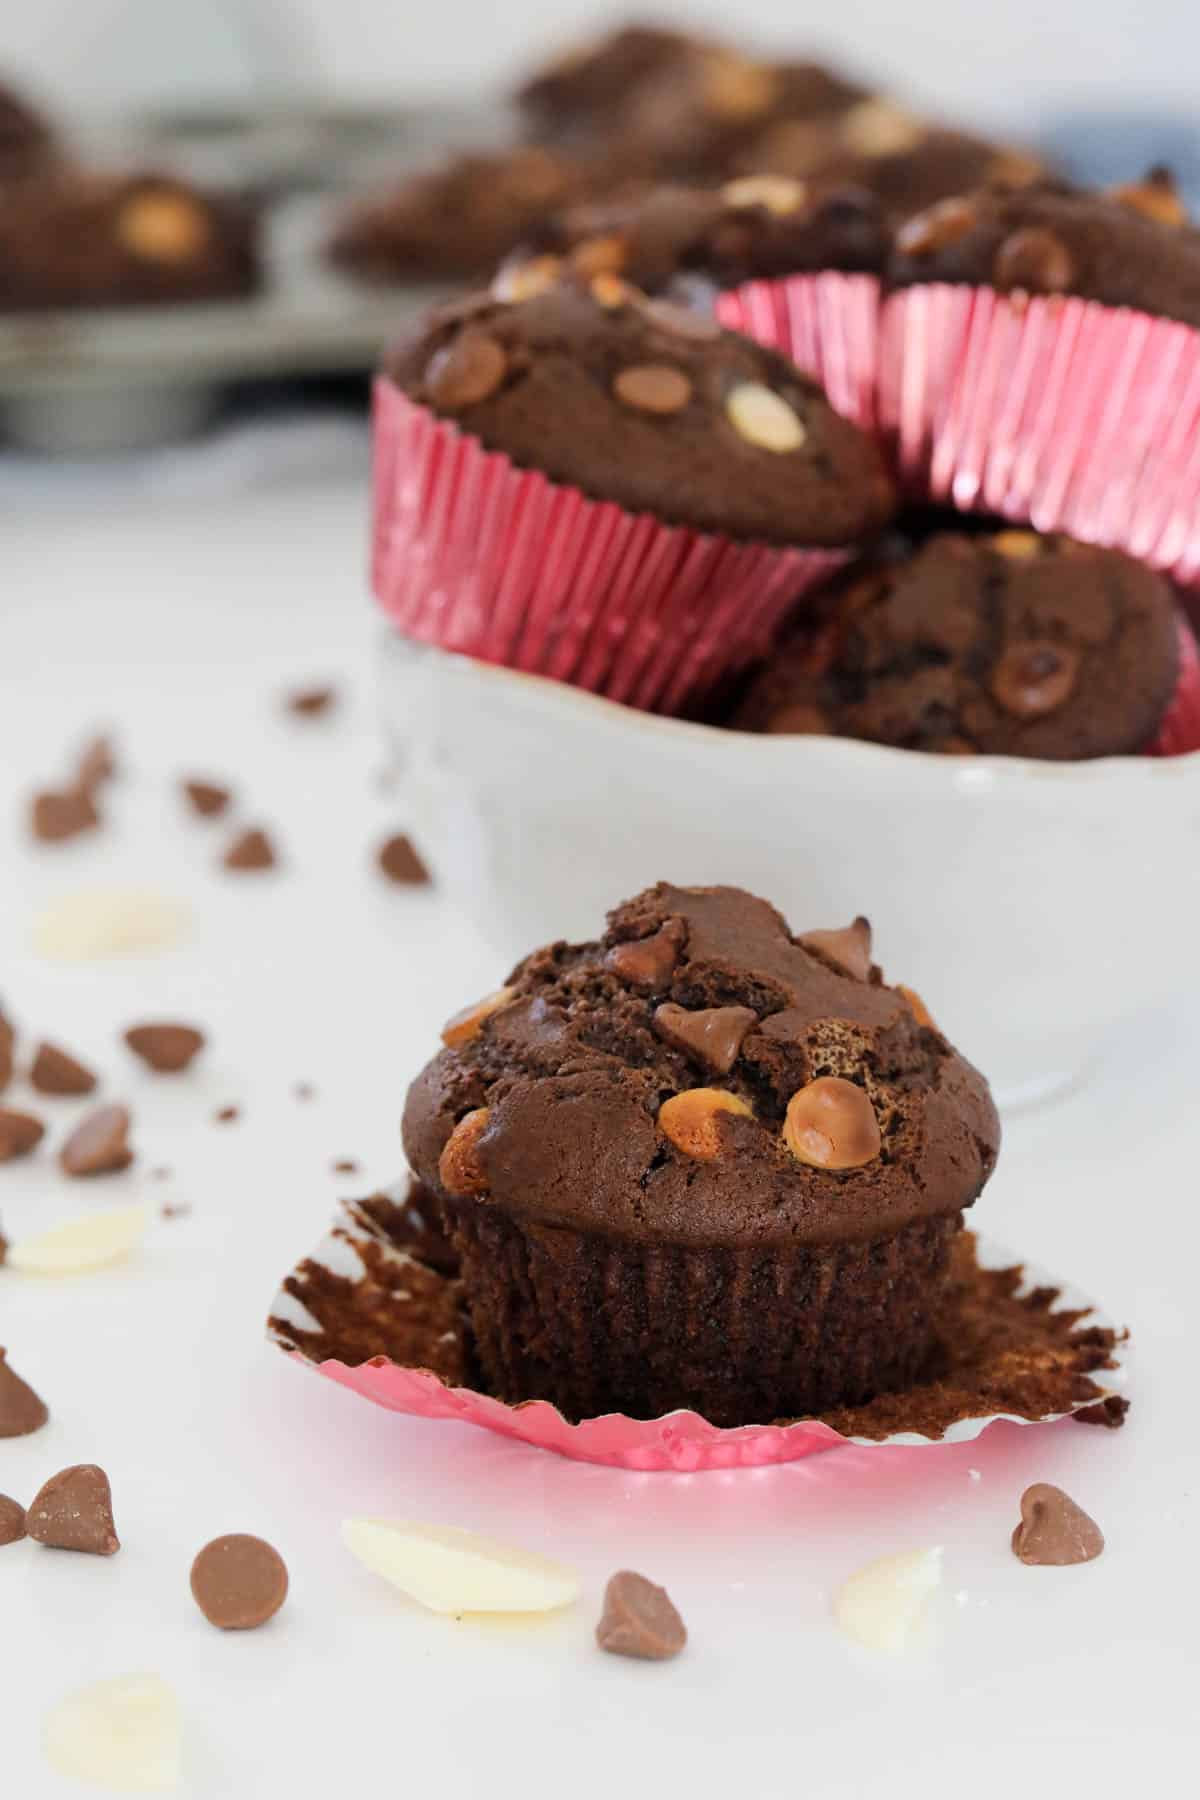 A chocolate muffin with the paper case removed, chocolate chips scattered around the surface.